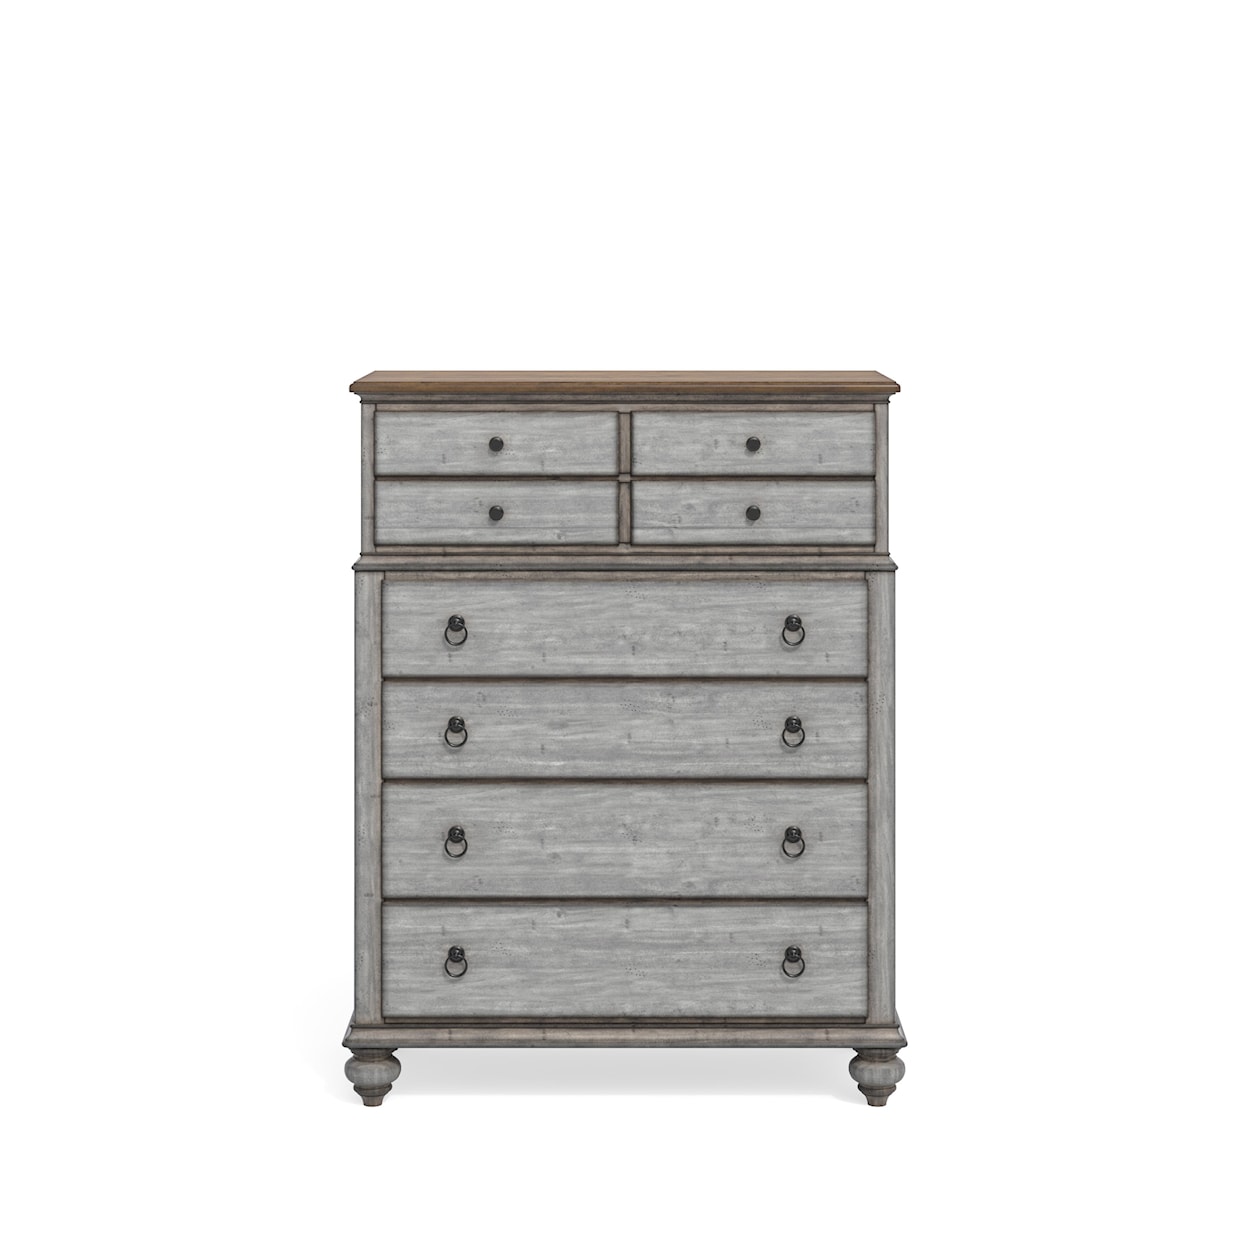 Flexsteel Casegoods Plymouth Chest of Drawers